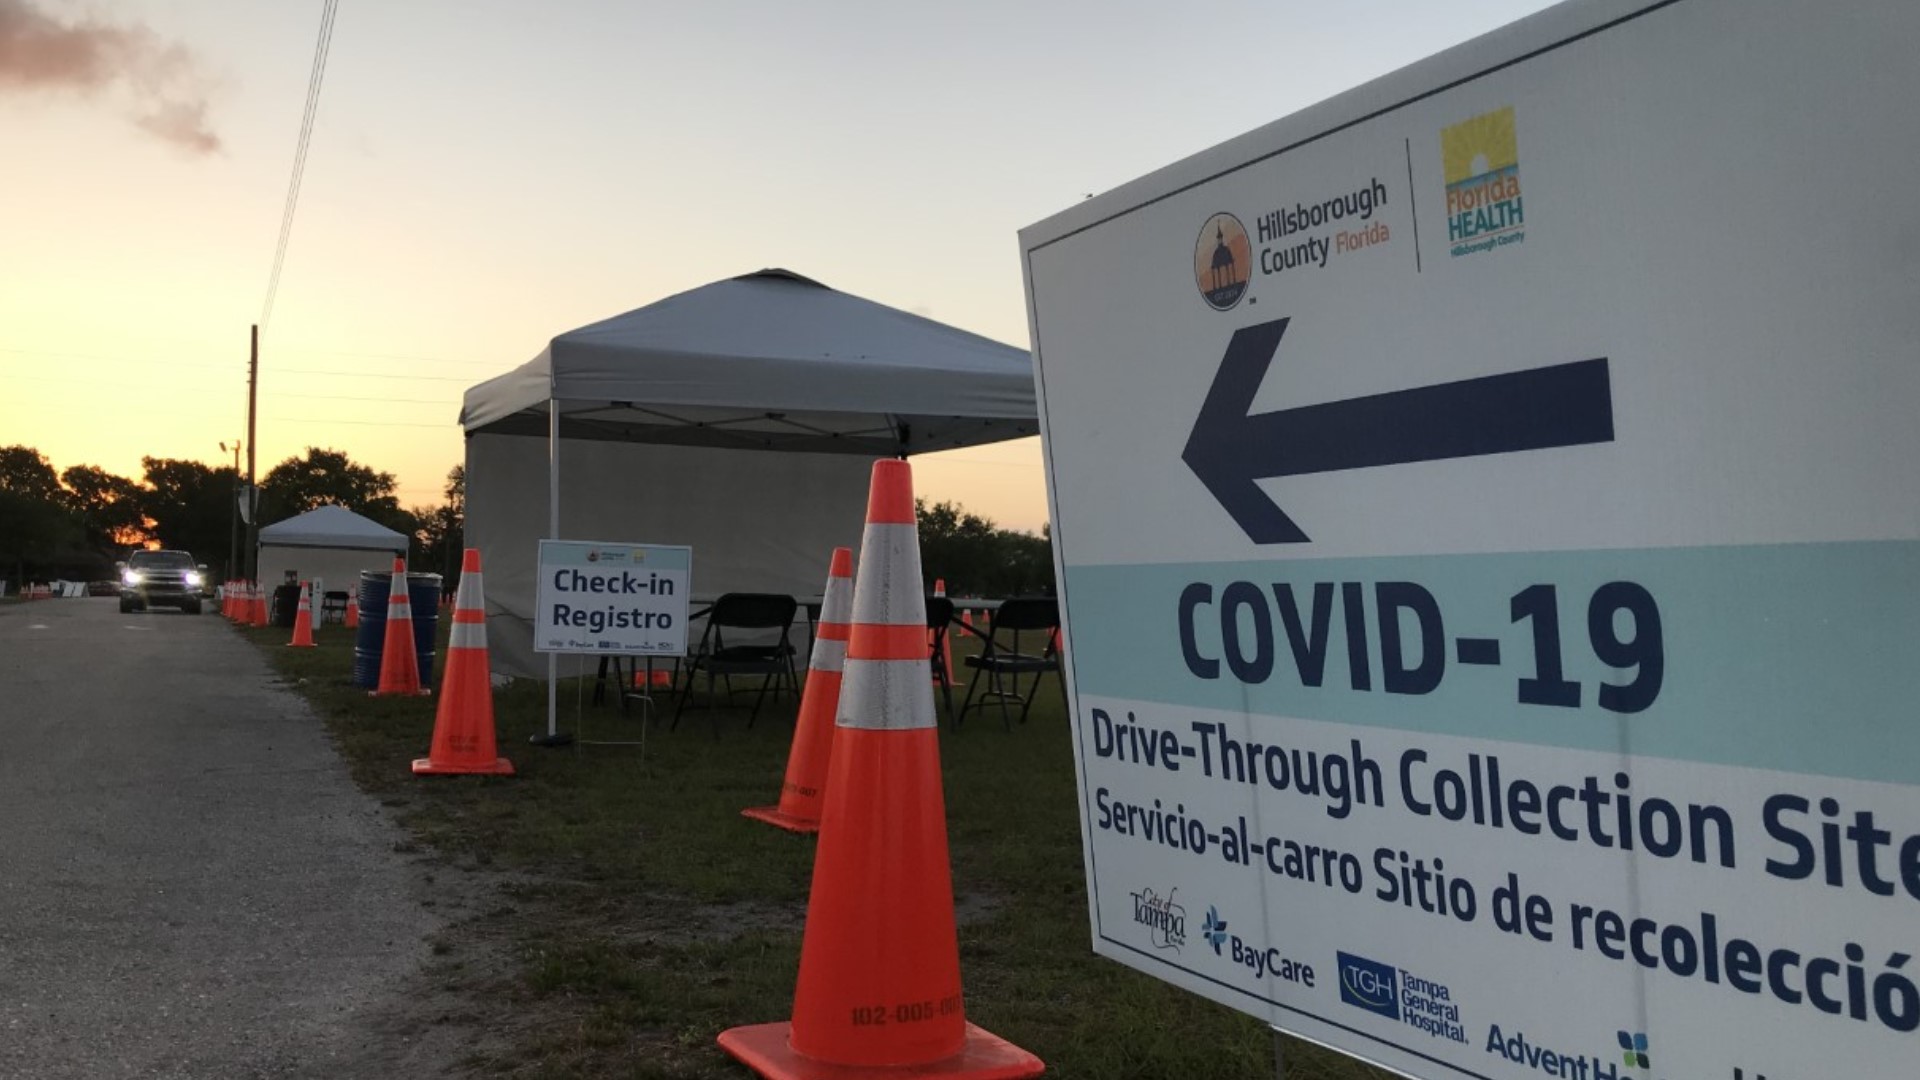 On Wednesday morning, Raymond James Stadium will become a testing site for COVID-19.